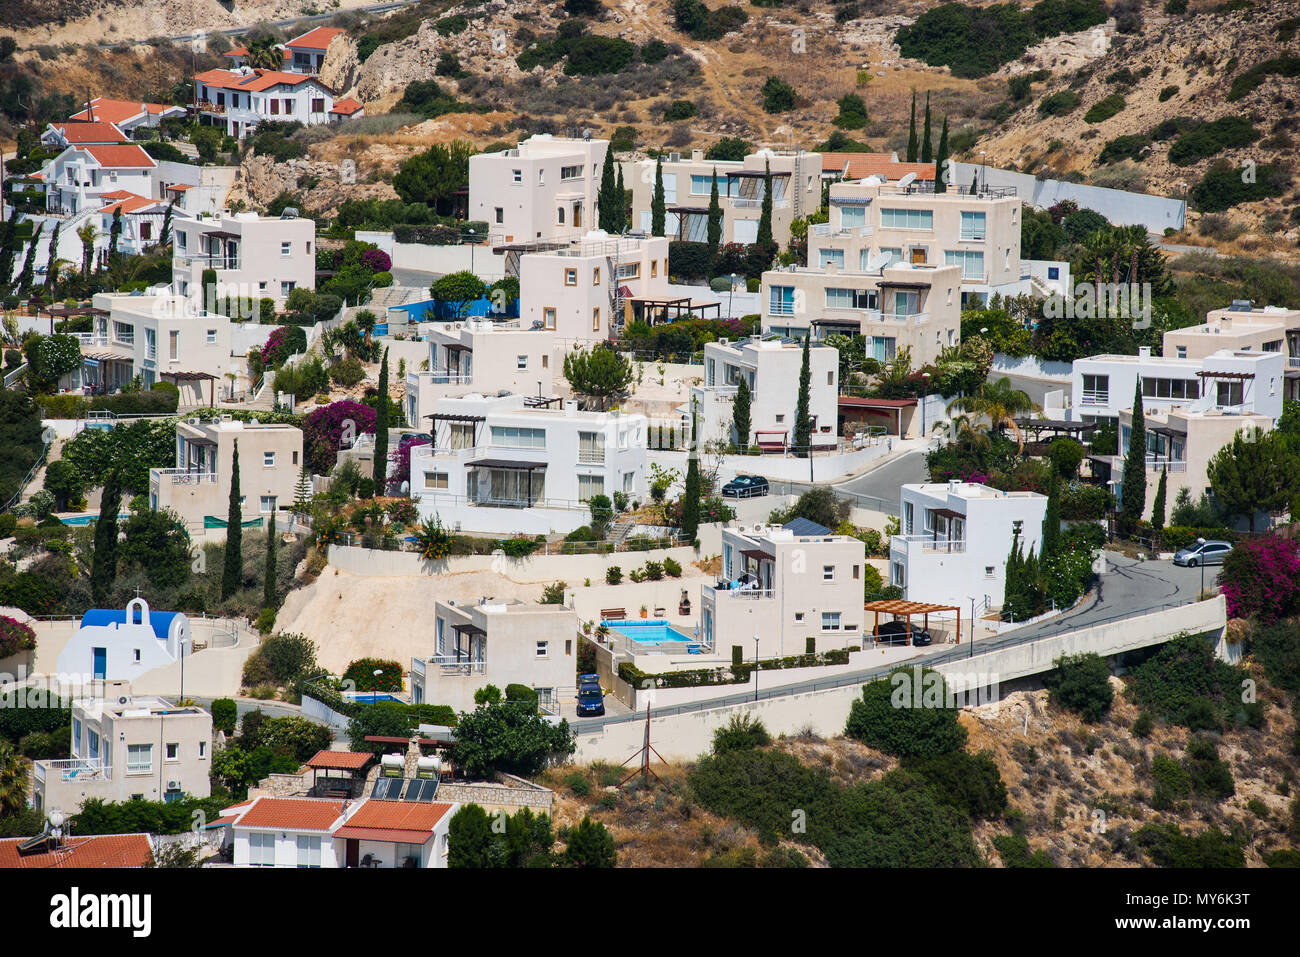 PISSOURI BAY, CYPRUS - JUNE 14, 2017: The Pissouri bay resort is a small village settlement with private apartments on the Mediterranean sea coast Stock Photo